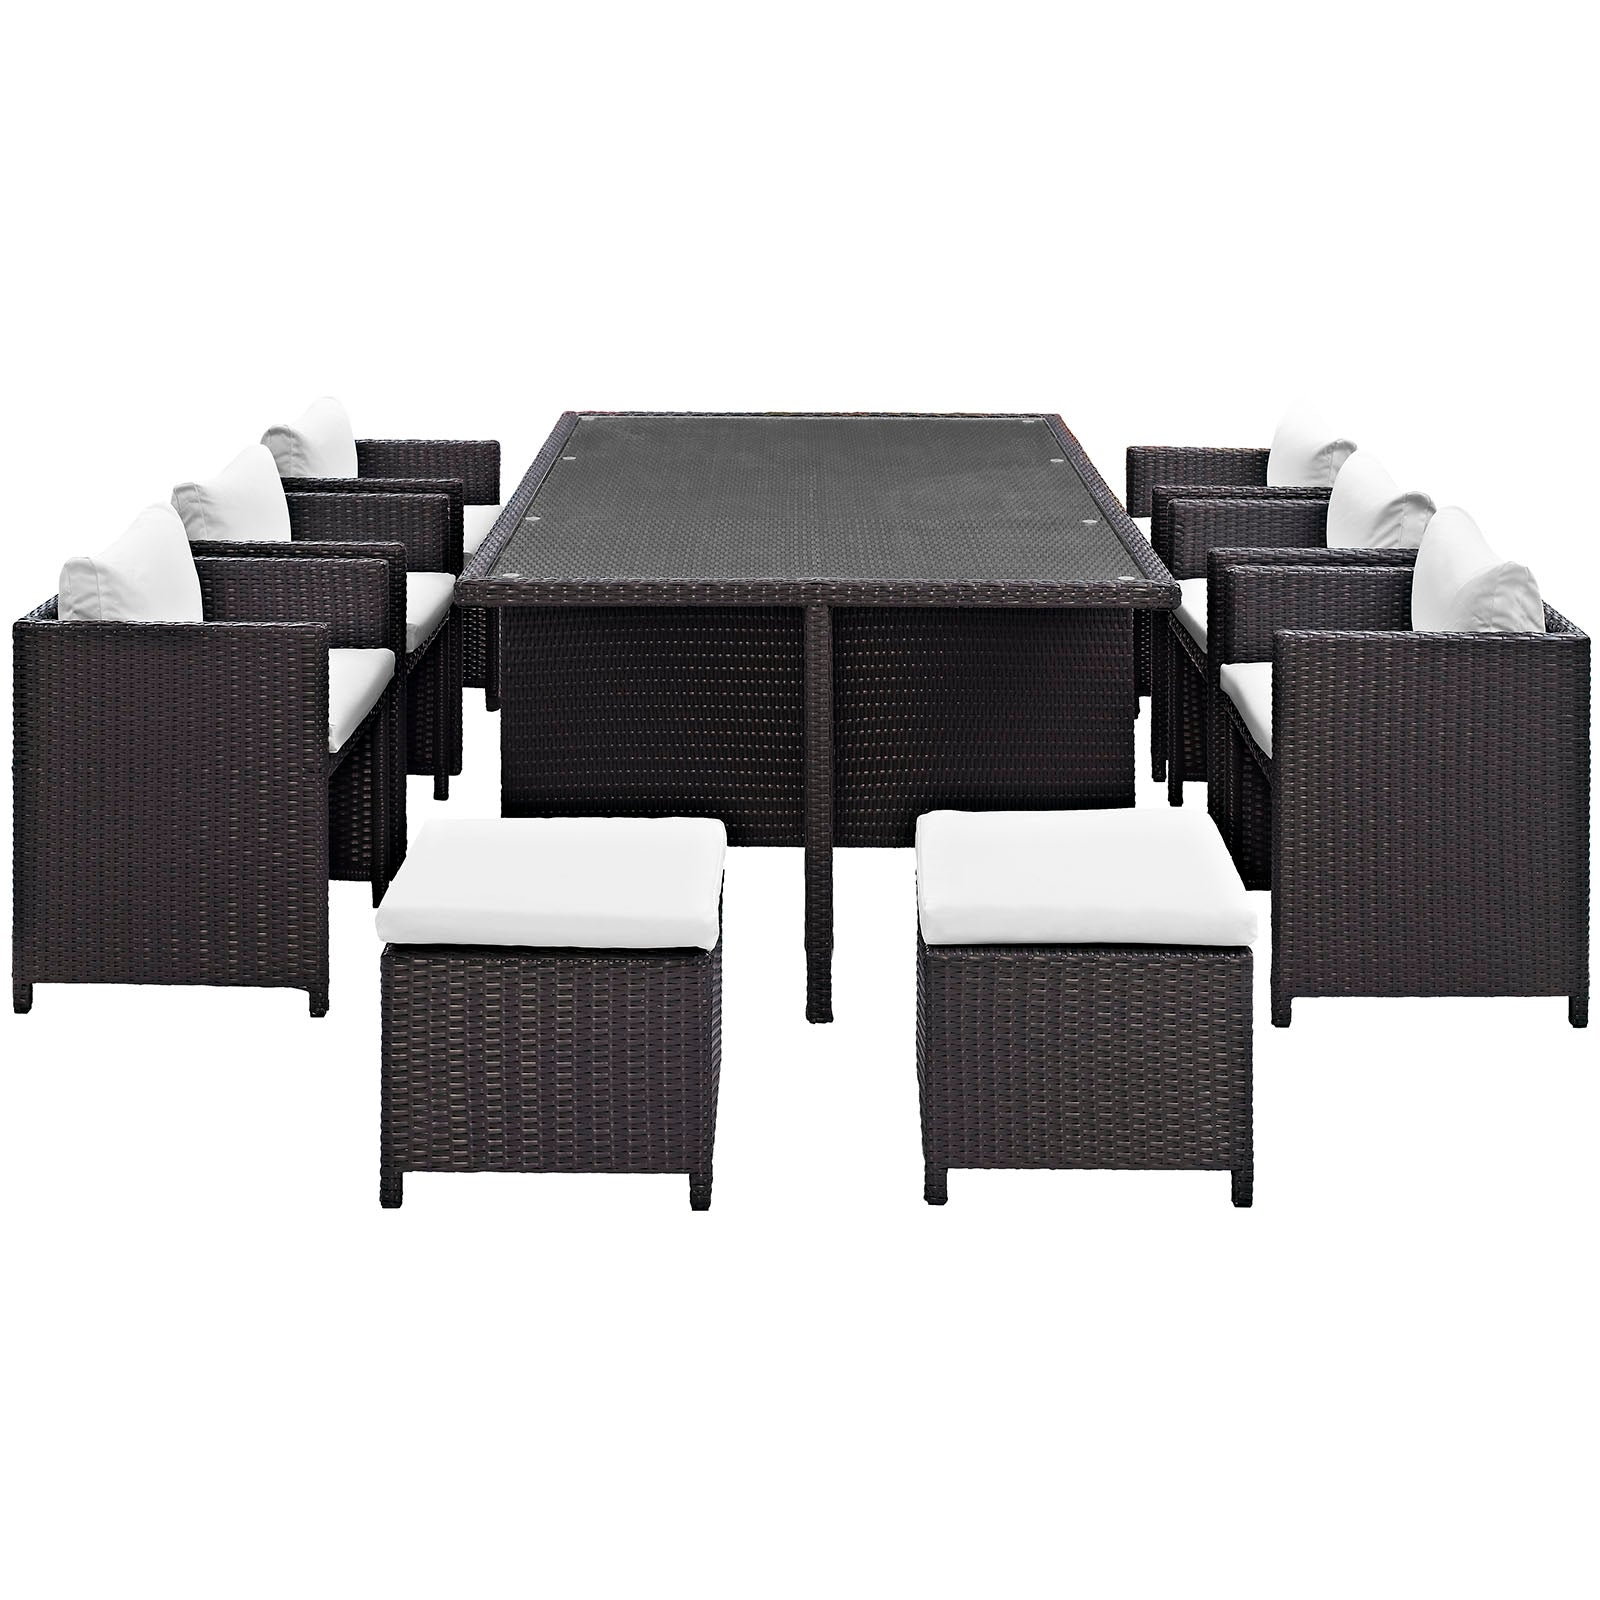 Reversal 11 Piece Outdoor Patio Dining Set - East Shore Modern Home Furnishings